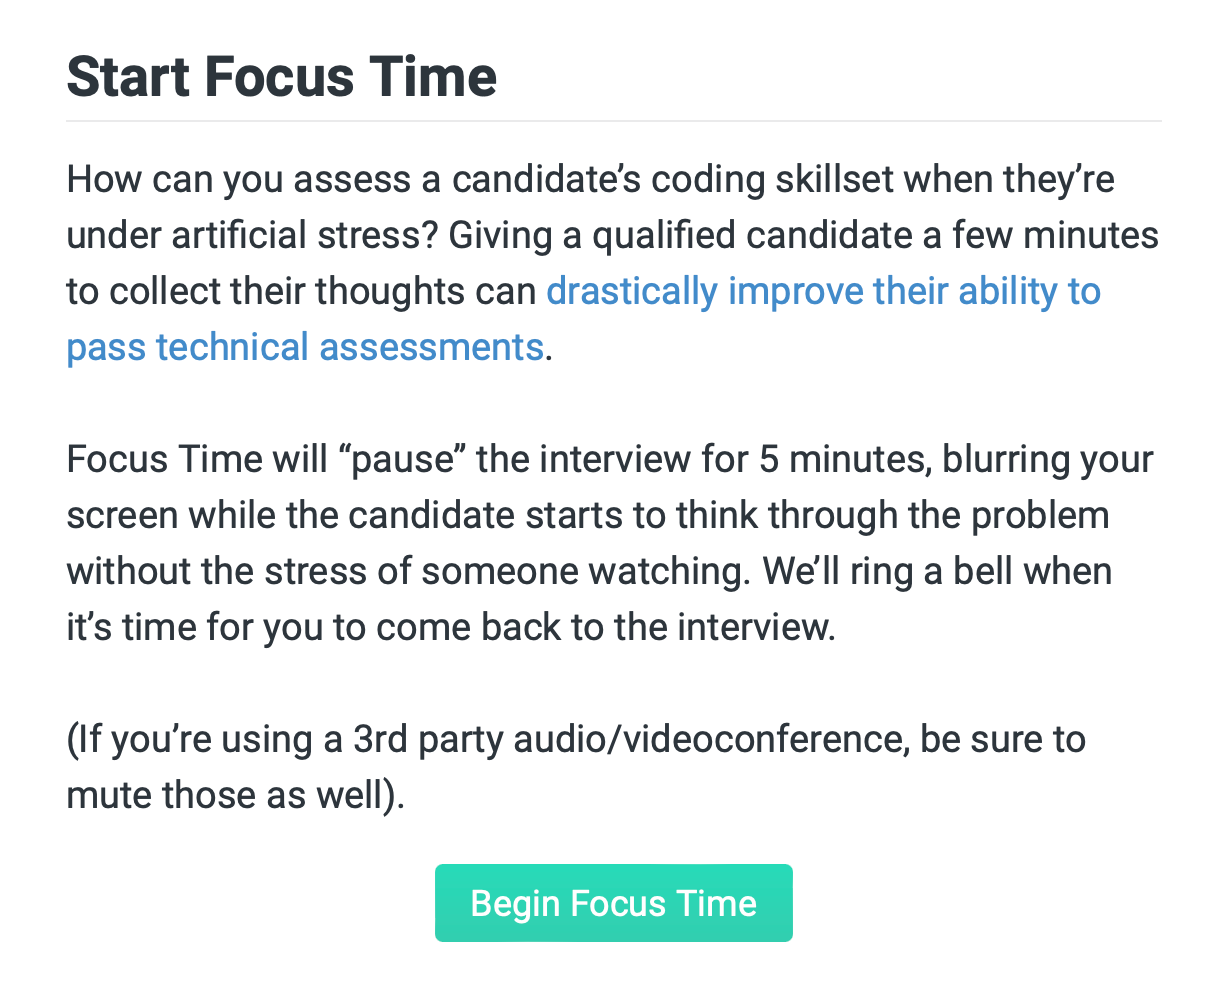 "start focus time. How can you assess a candidate's coding skillset when they're under artificial stress? Giving a qualified candidate a few minutes to collect their thoughts can drastically improve their ability to pass technical assessments.

Focus Time will “pause” the interview for 5 minutes, blurring your screen while the candidate starts to think through the problem without the stress of someone watching. We'll play a sound when it's time for you to come back to the interview.

(If you're using a 3rd party audio/videoconference, be sure to mute those as well)."